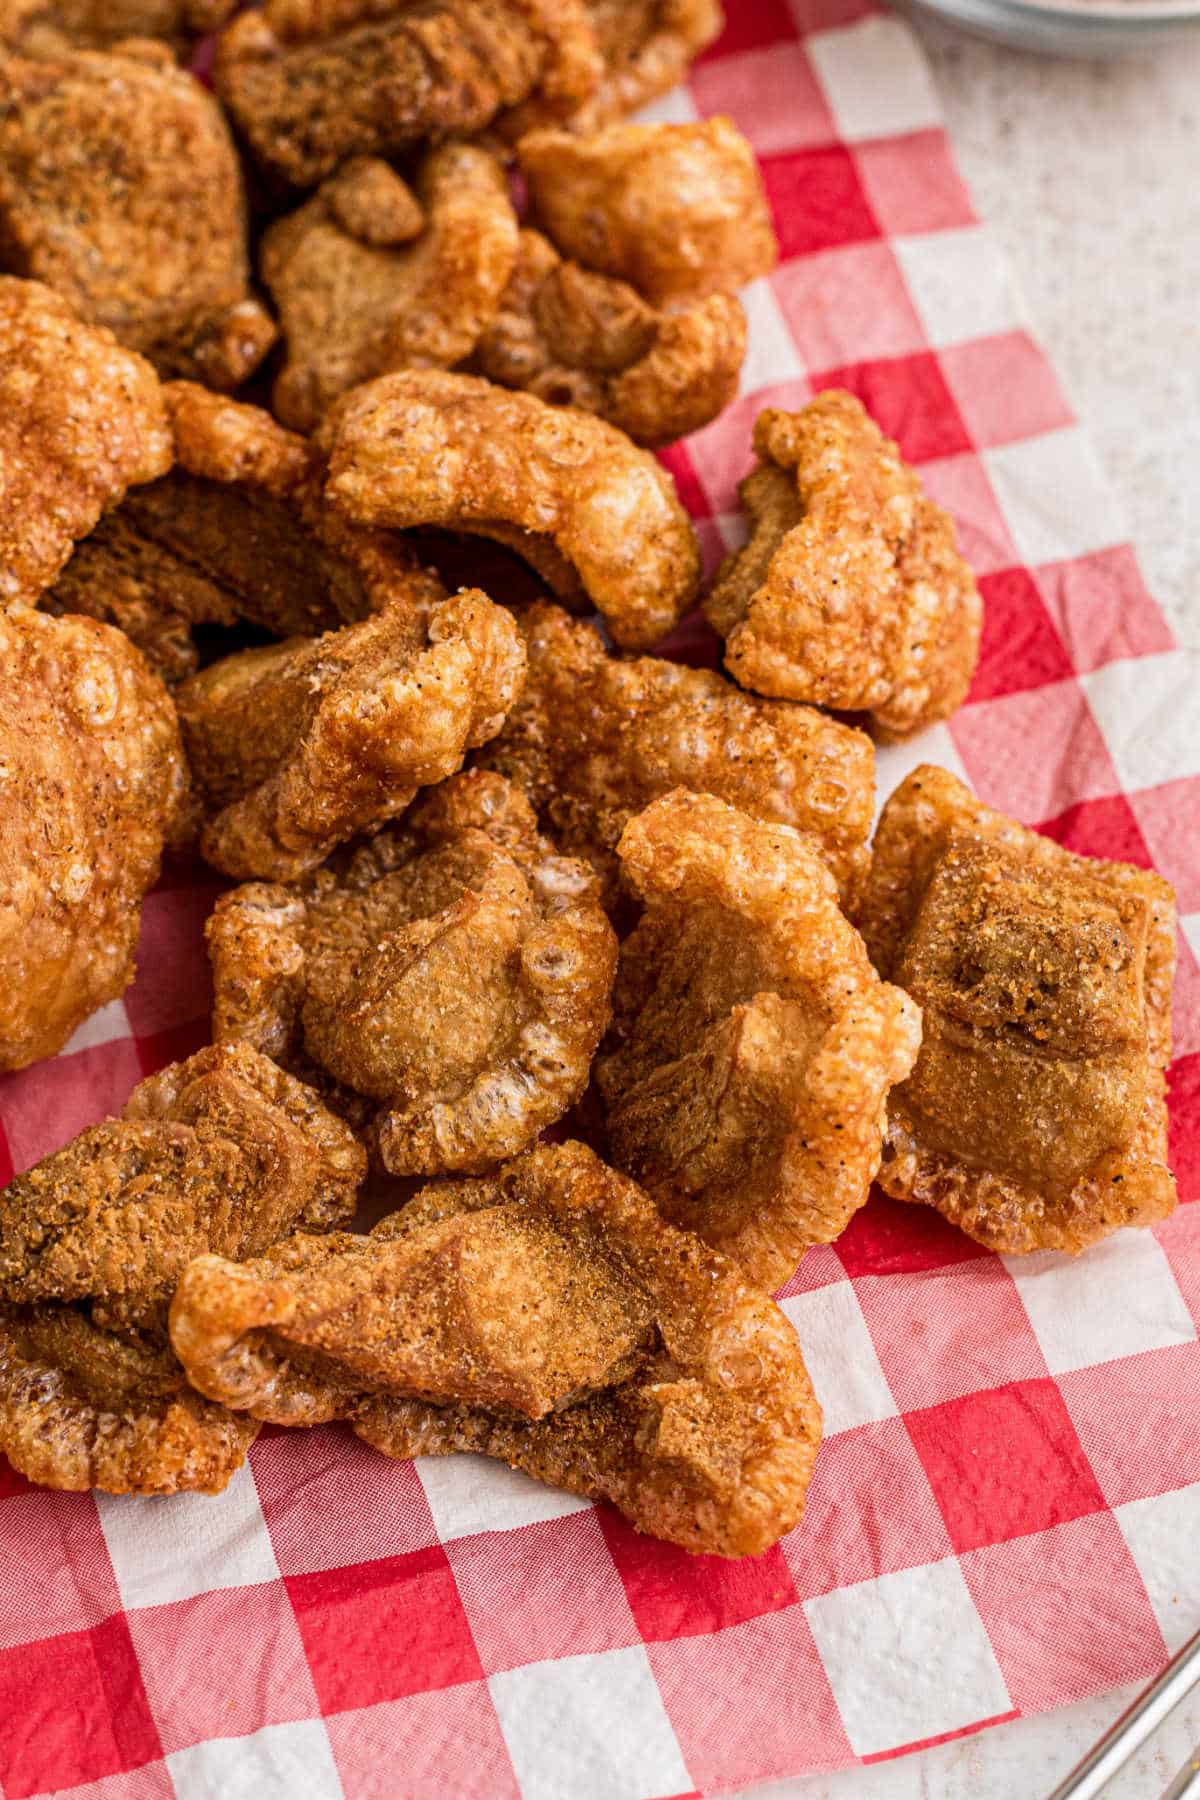 A pile of pork cracklins on a red and white napkin.